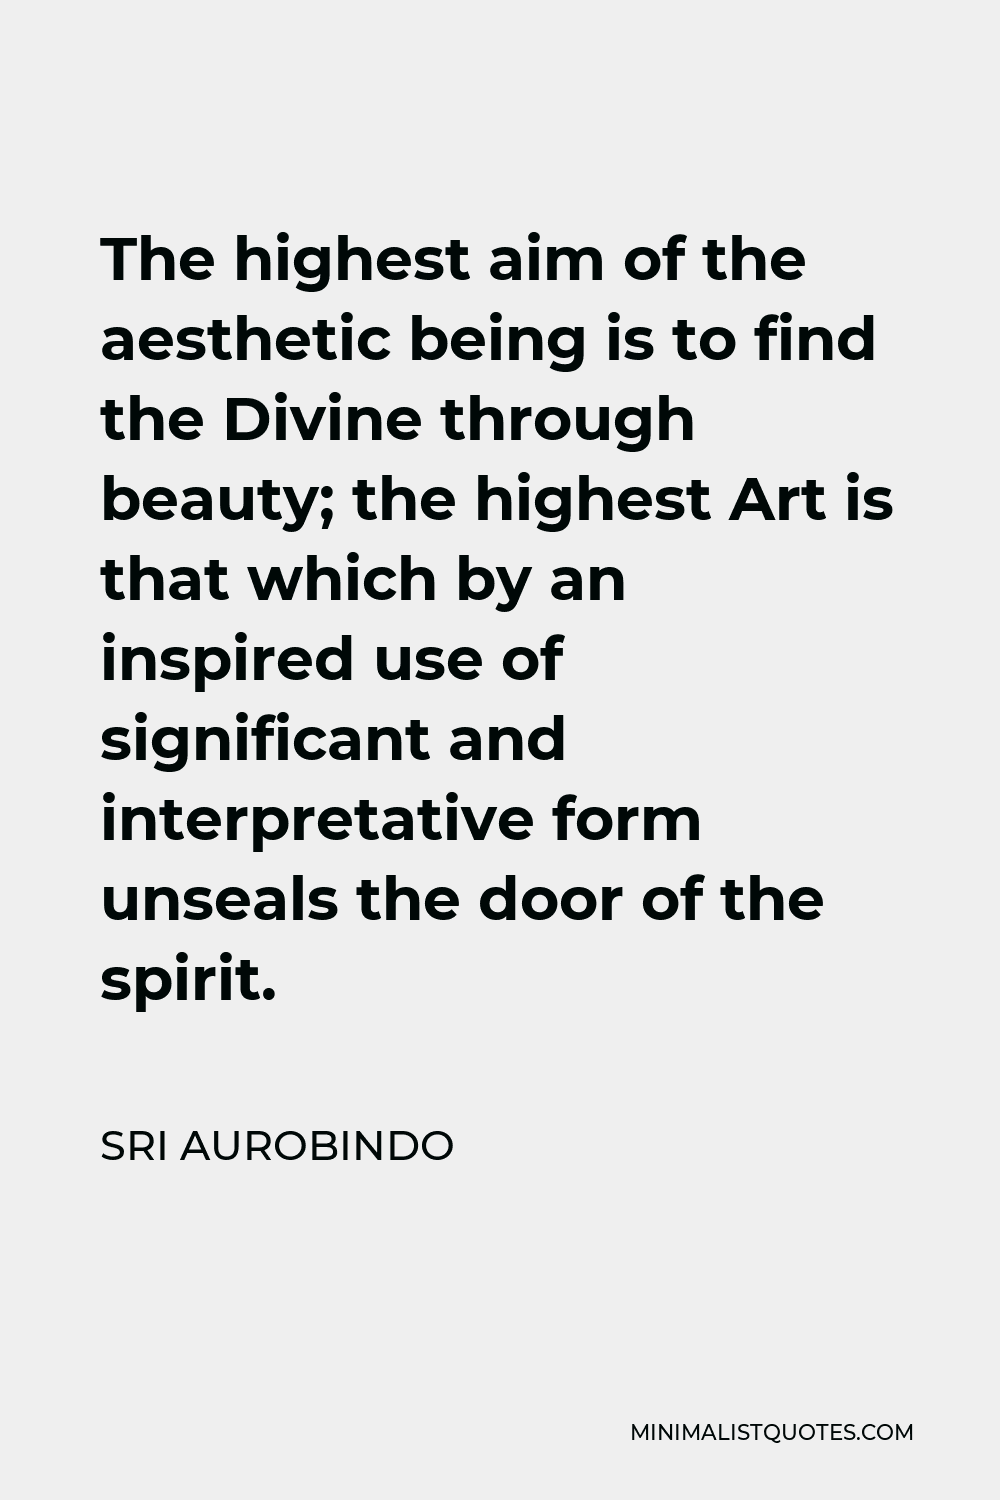 Sri Aurobindo Quote - The highest aim of the aesthetic being is to find the Divine through beauty; the highest Art is that which by an inspired use of significant and interpretative form unseals the door of the spirit.